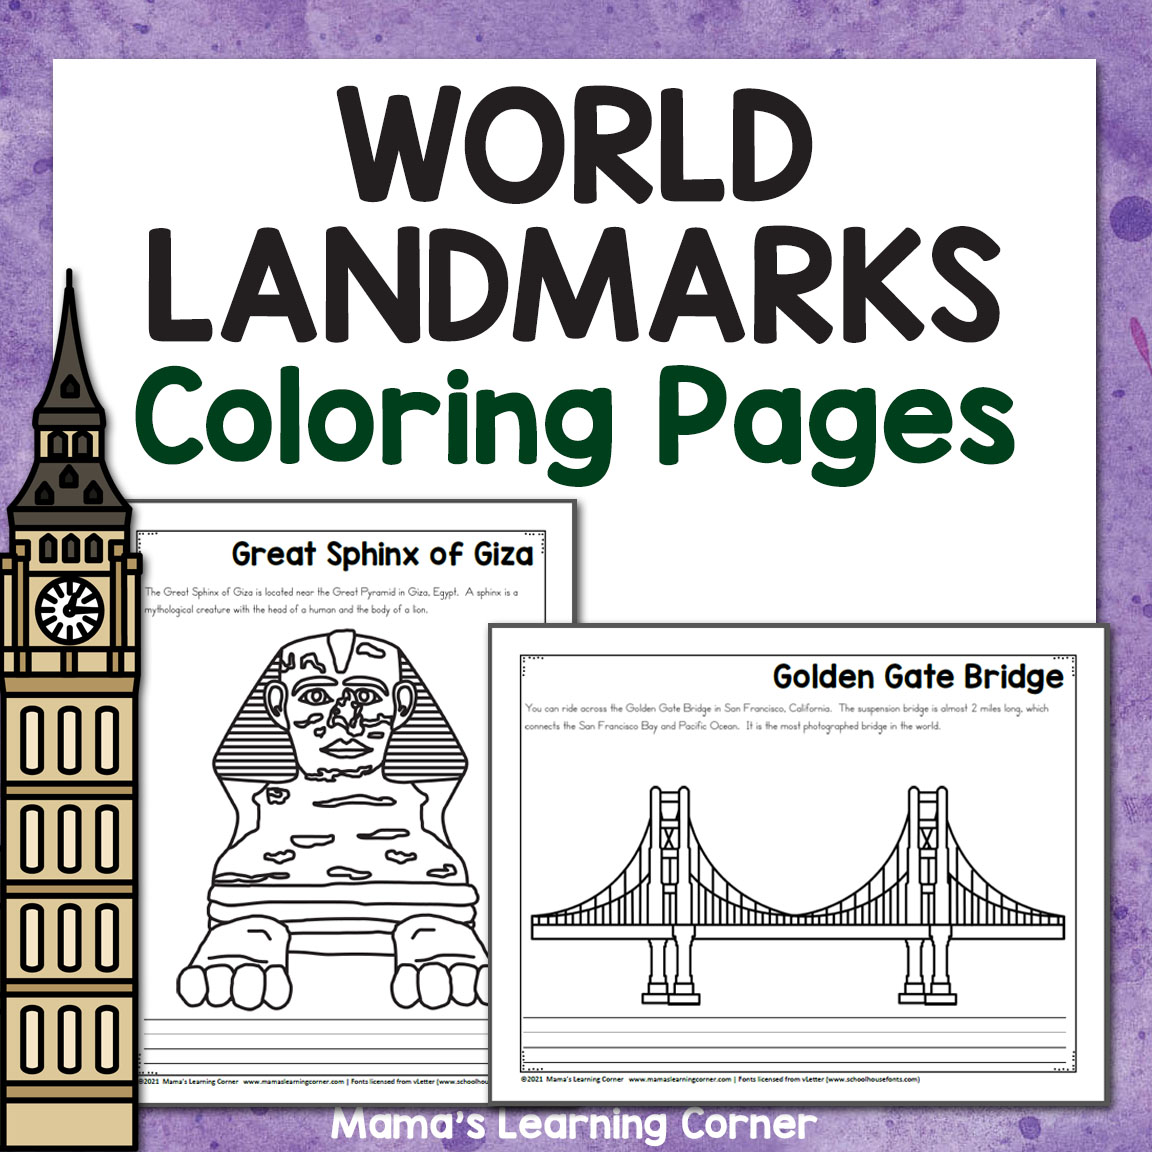 World landmark coloring pages